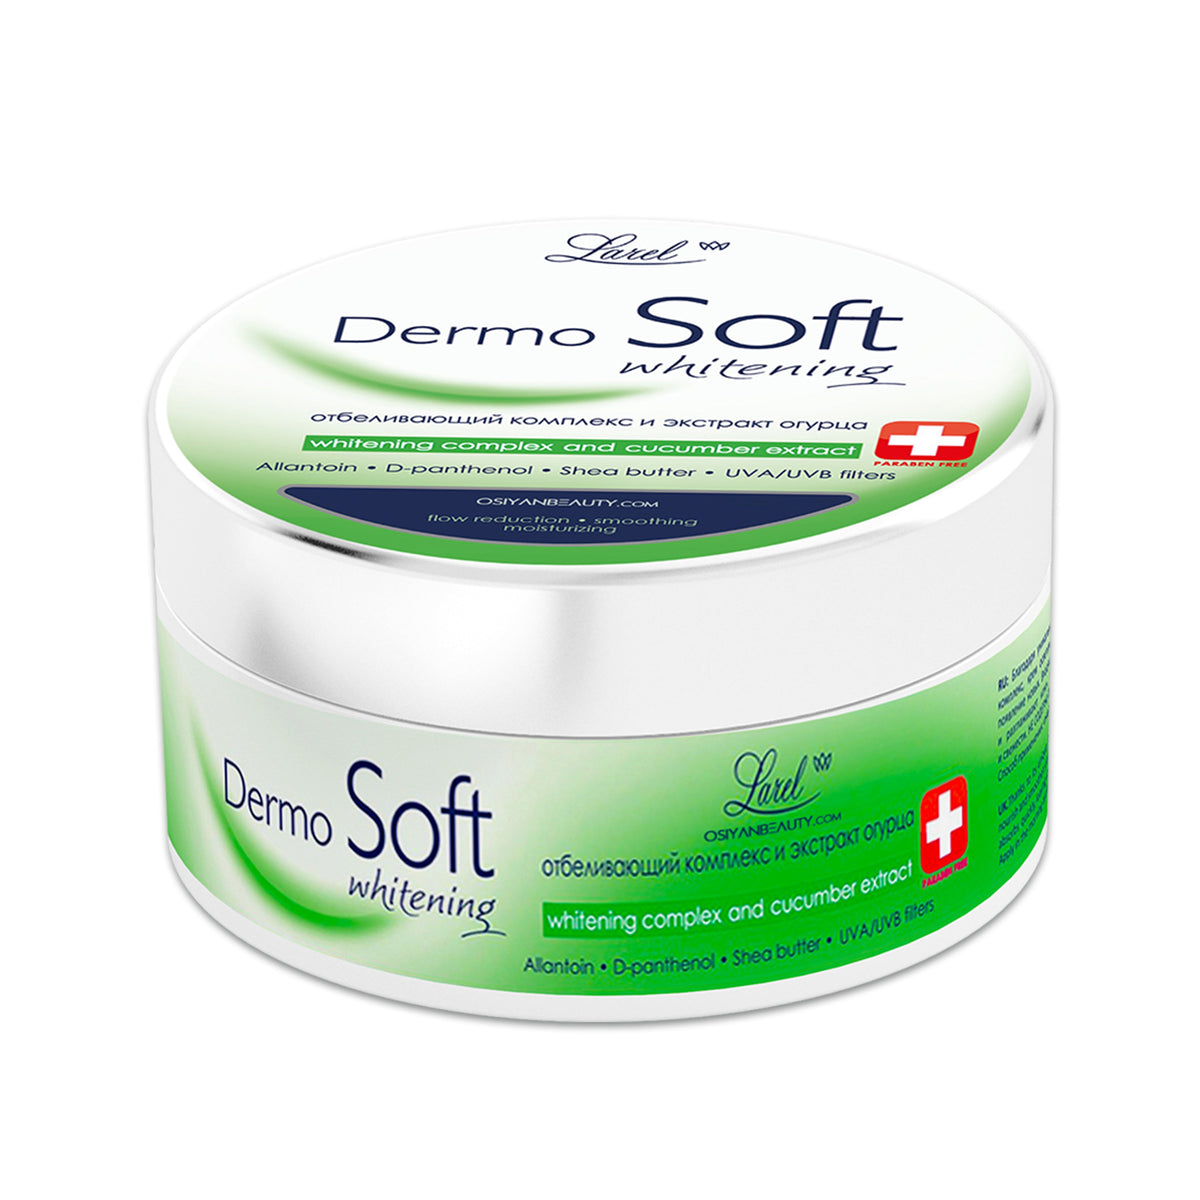 DERMOSOFT Face Cream Whitening & Cucumber Extract 200ml (Made in Europe)